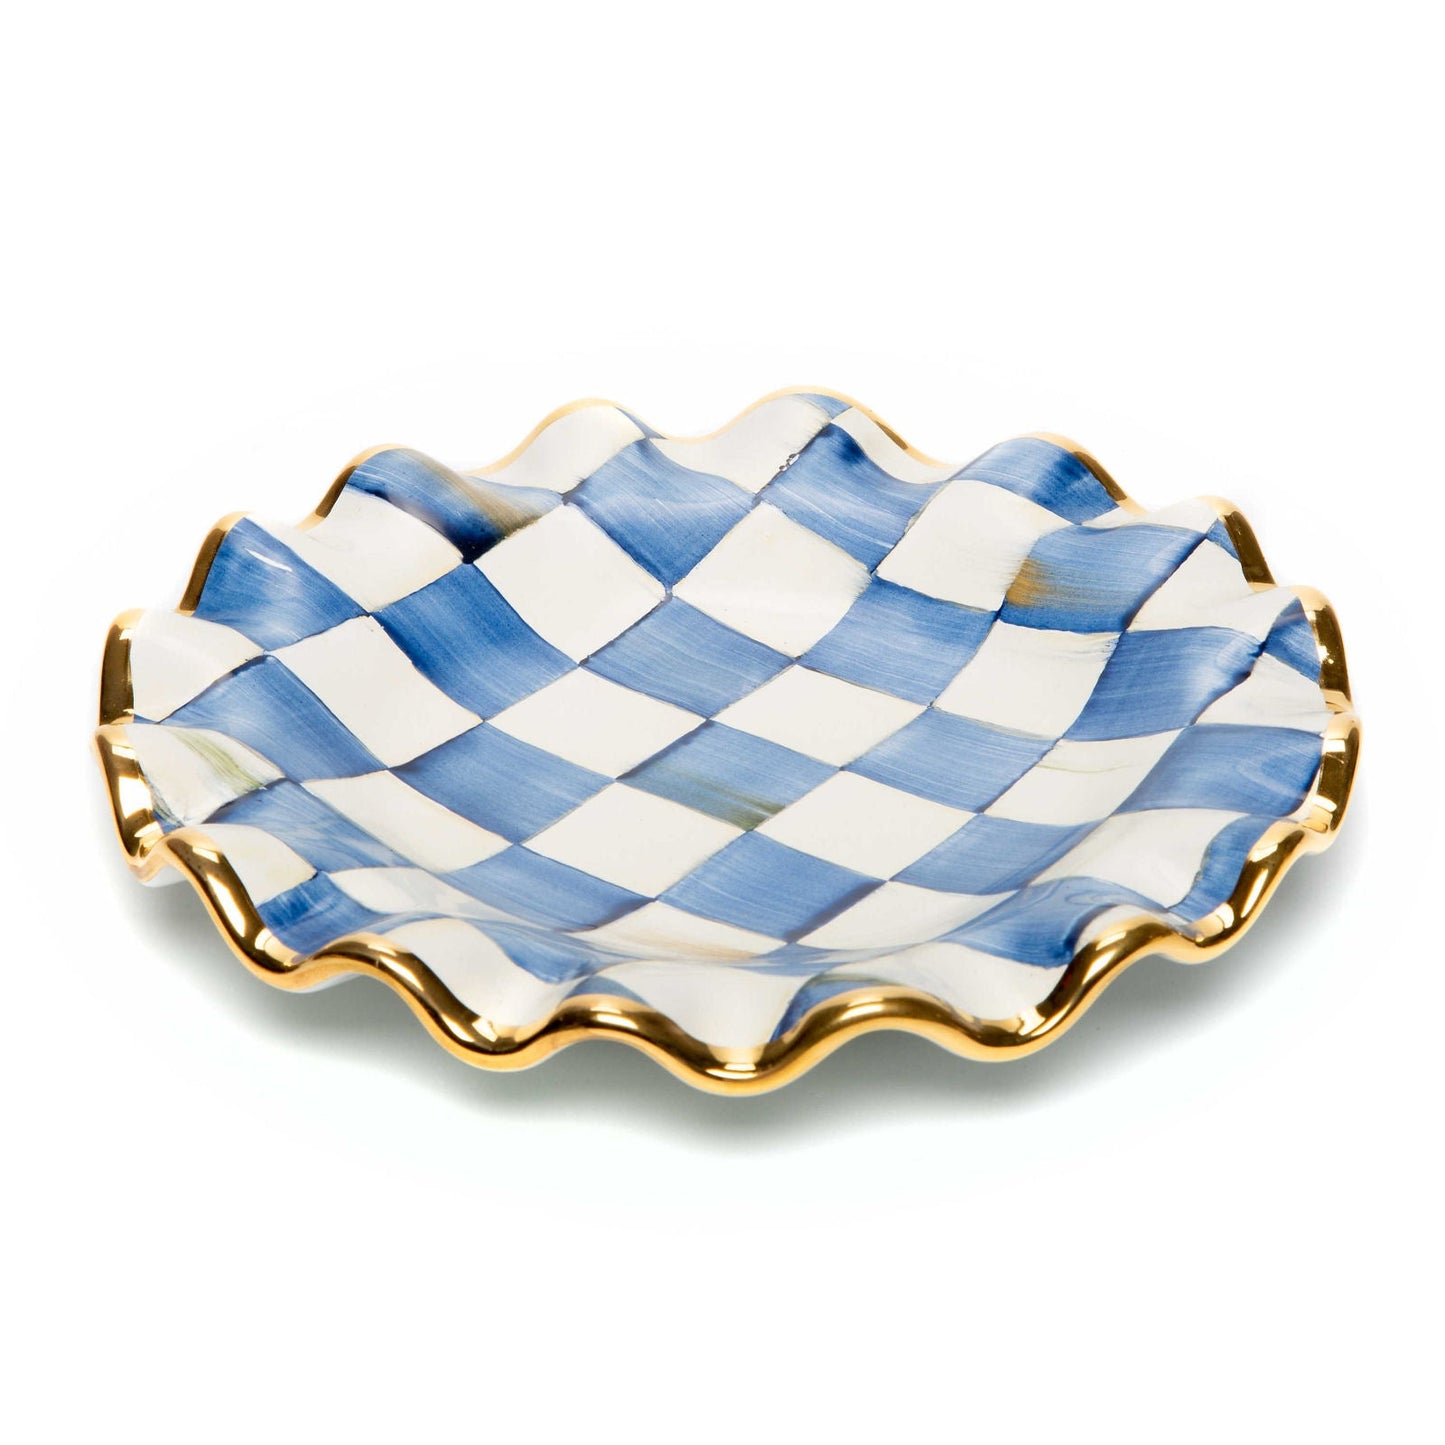 Royal Check Ceramic Blue Fluted Dessert Plate - |VESIMI Design| Luxury and Rustic bathrooms online